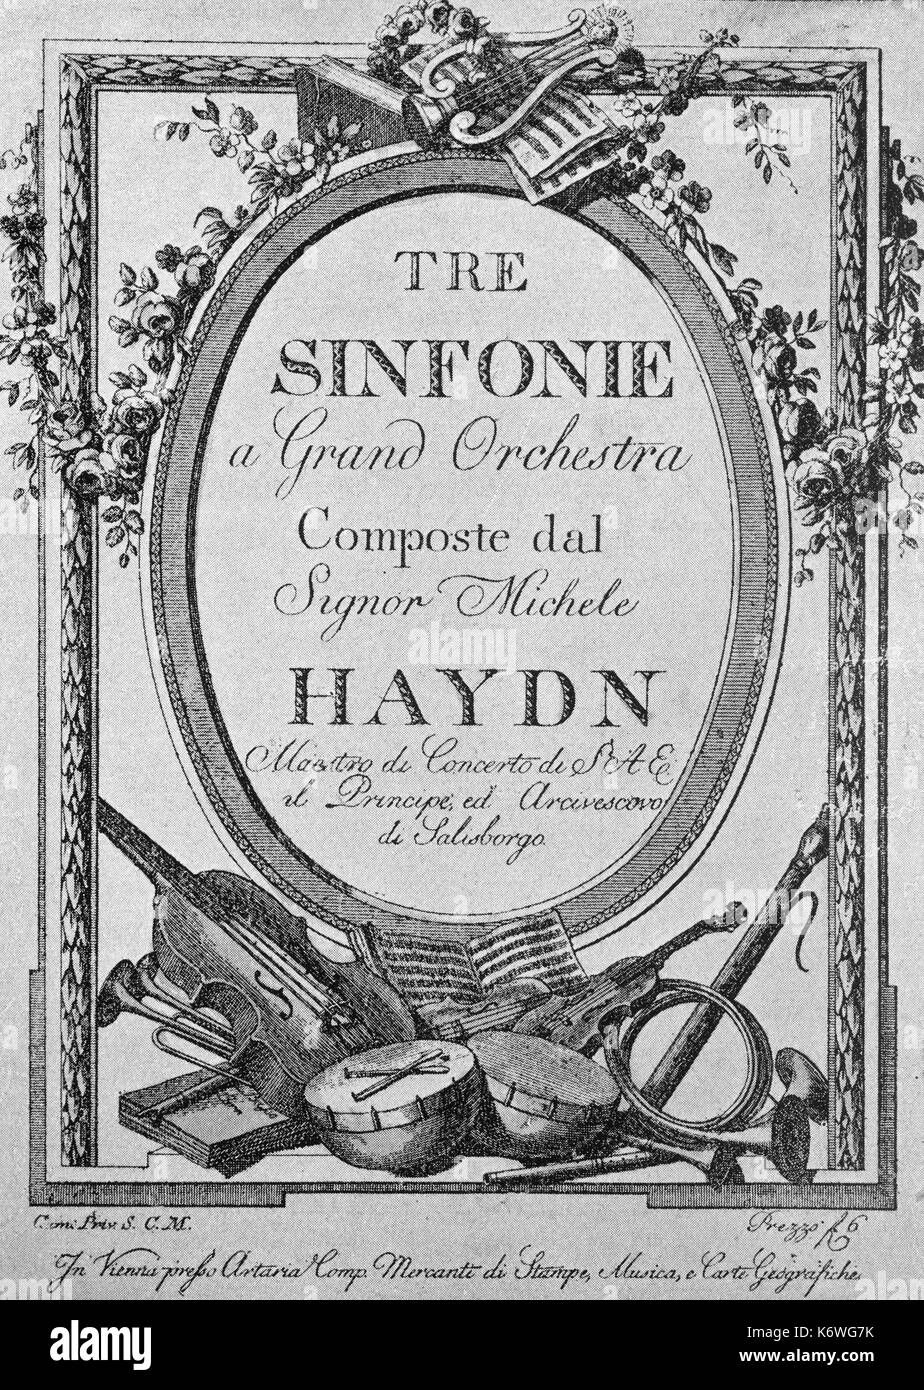 Michael Haydn - frontispiece and title page from the orchestral score of the Austrian composer 's '3 symphonies'. Illustrations of orchestral instruments, including valveless horns. MH, younger brother of Franz Joseph Haydn: 14 September 1737 - 10  August 1806. Stock Photo